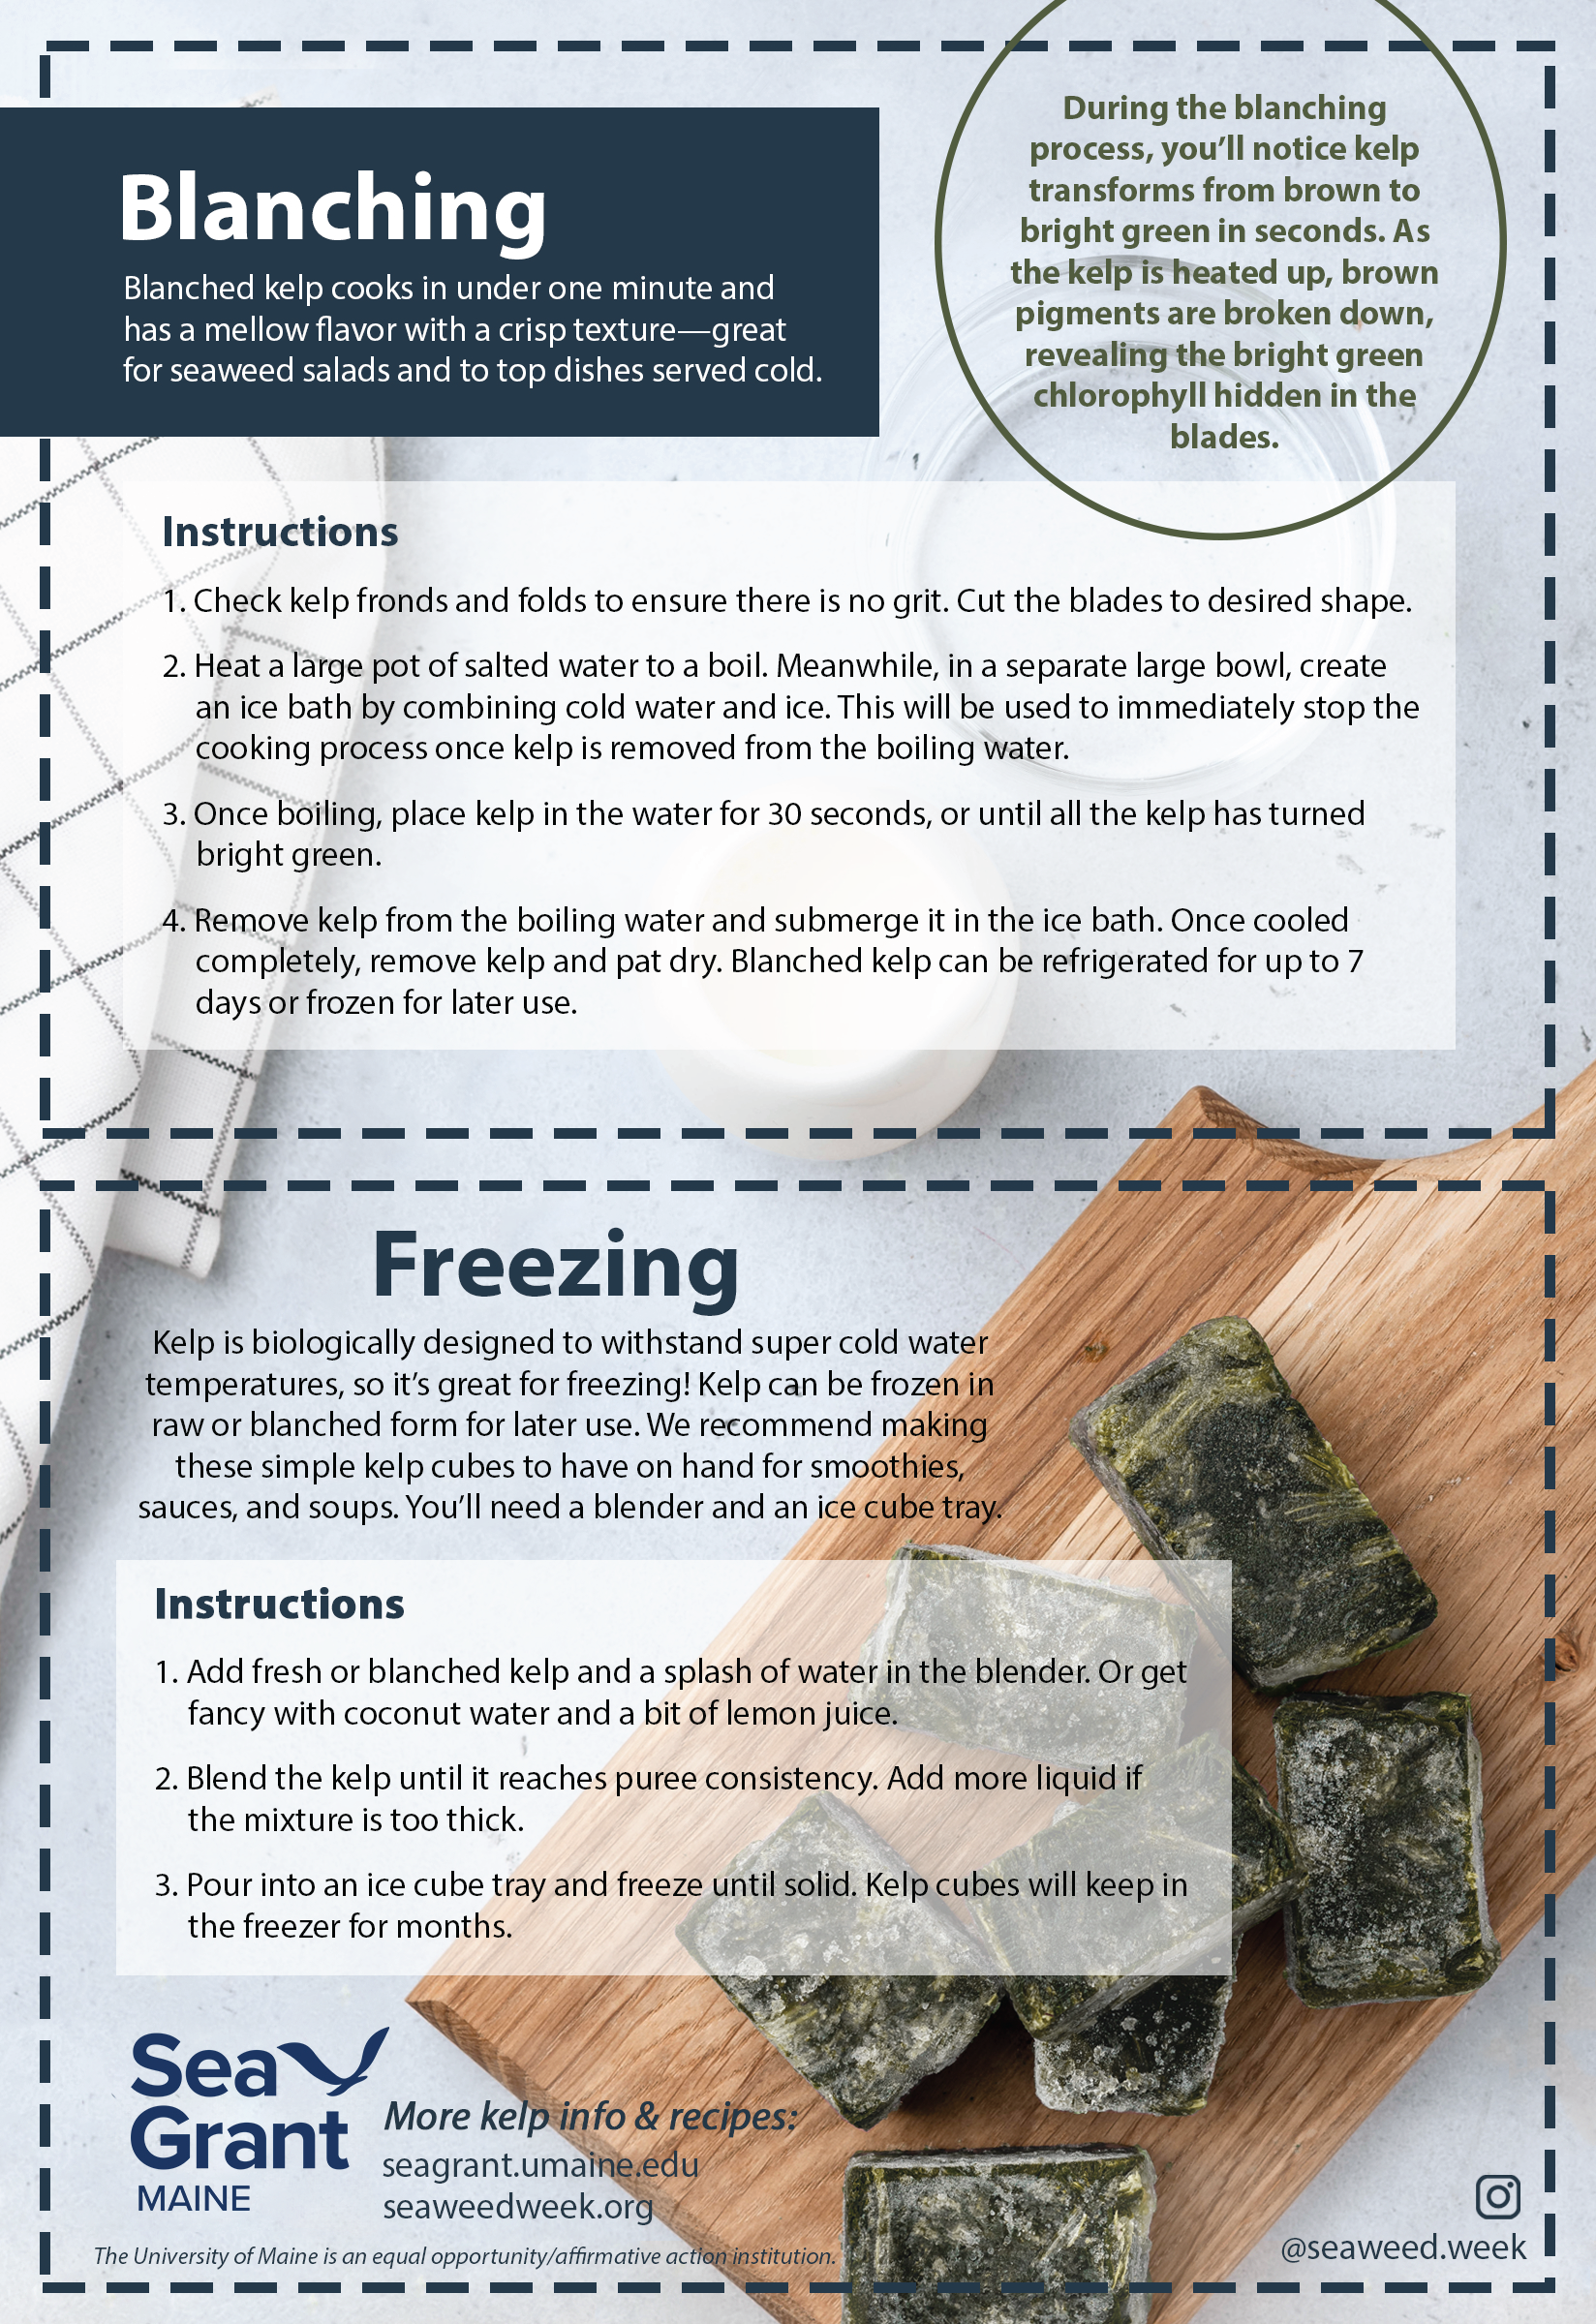 A recipe card containing instructions on how to blanch and freeze kelp, with a photo of frozen seaweed ice cubes on a wooden cutting board in the background